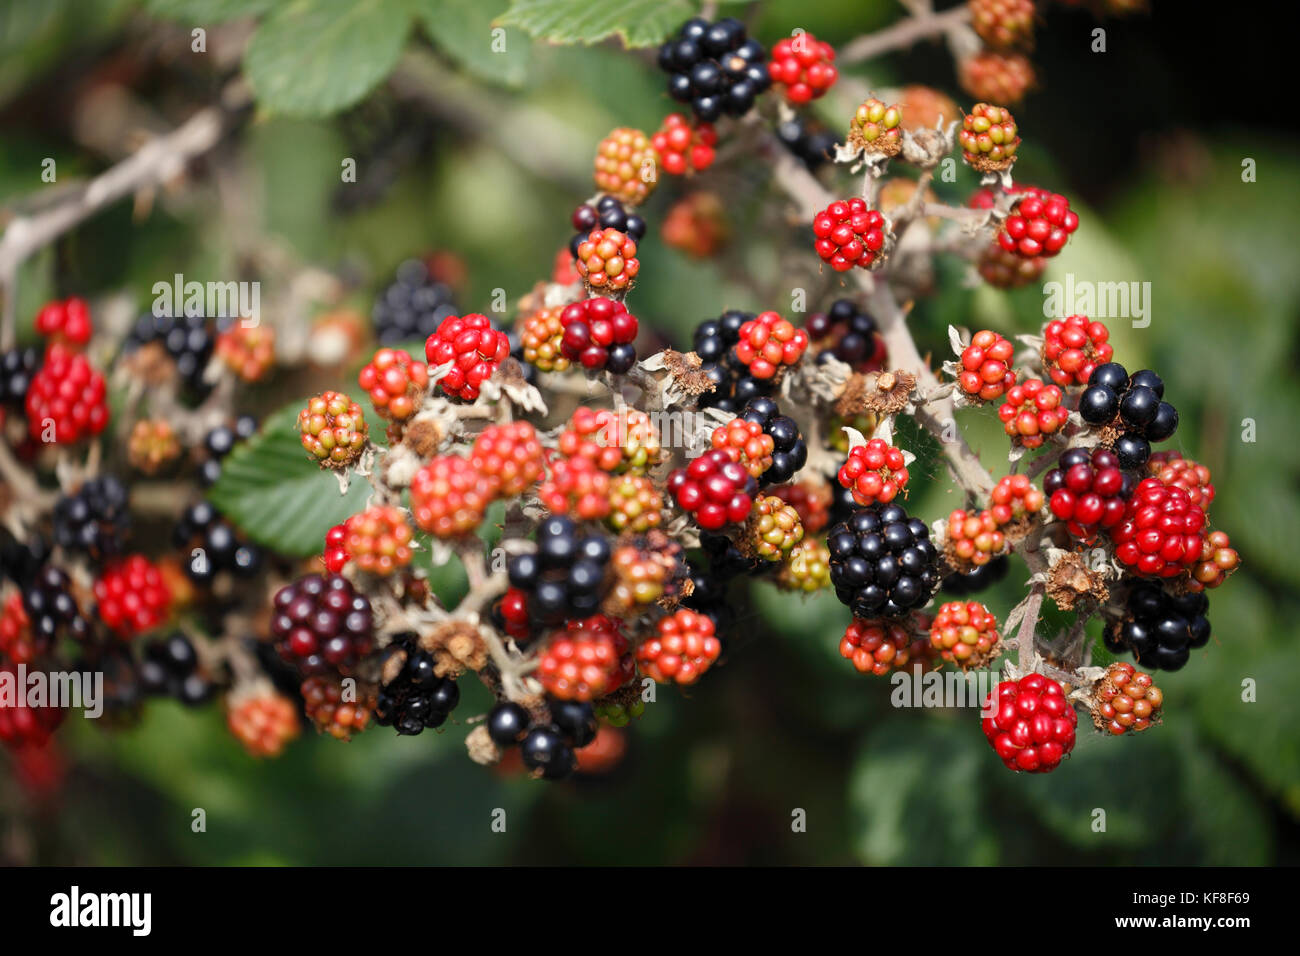 Ripe and unripe blackberries growing in a Norfolk hedgerow. Stock Photo